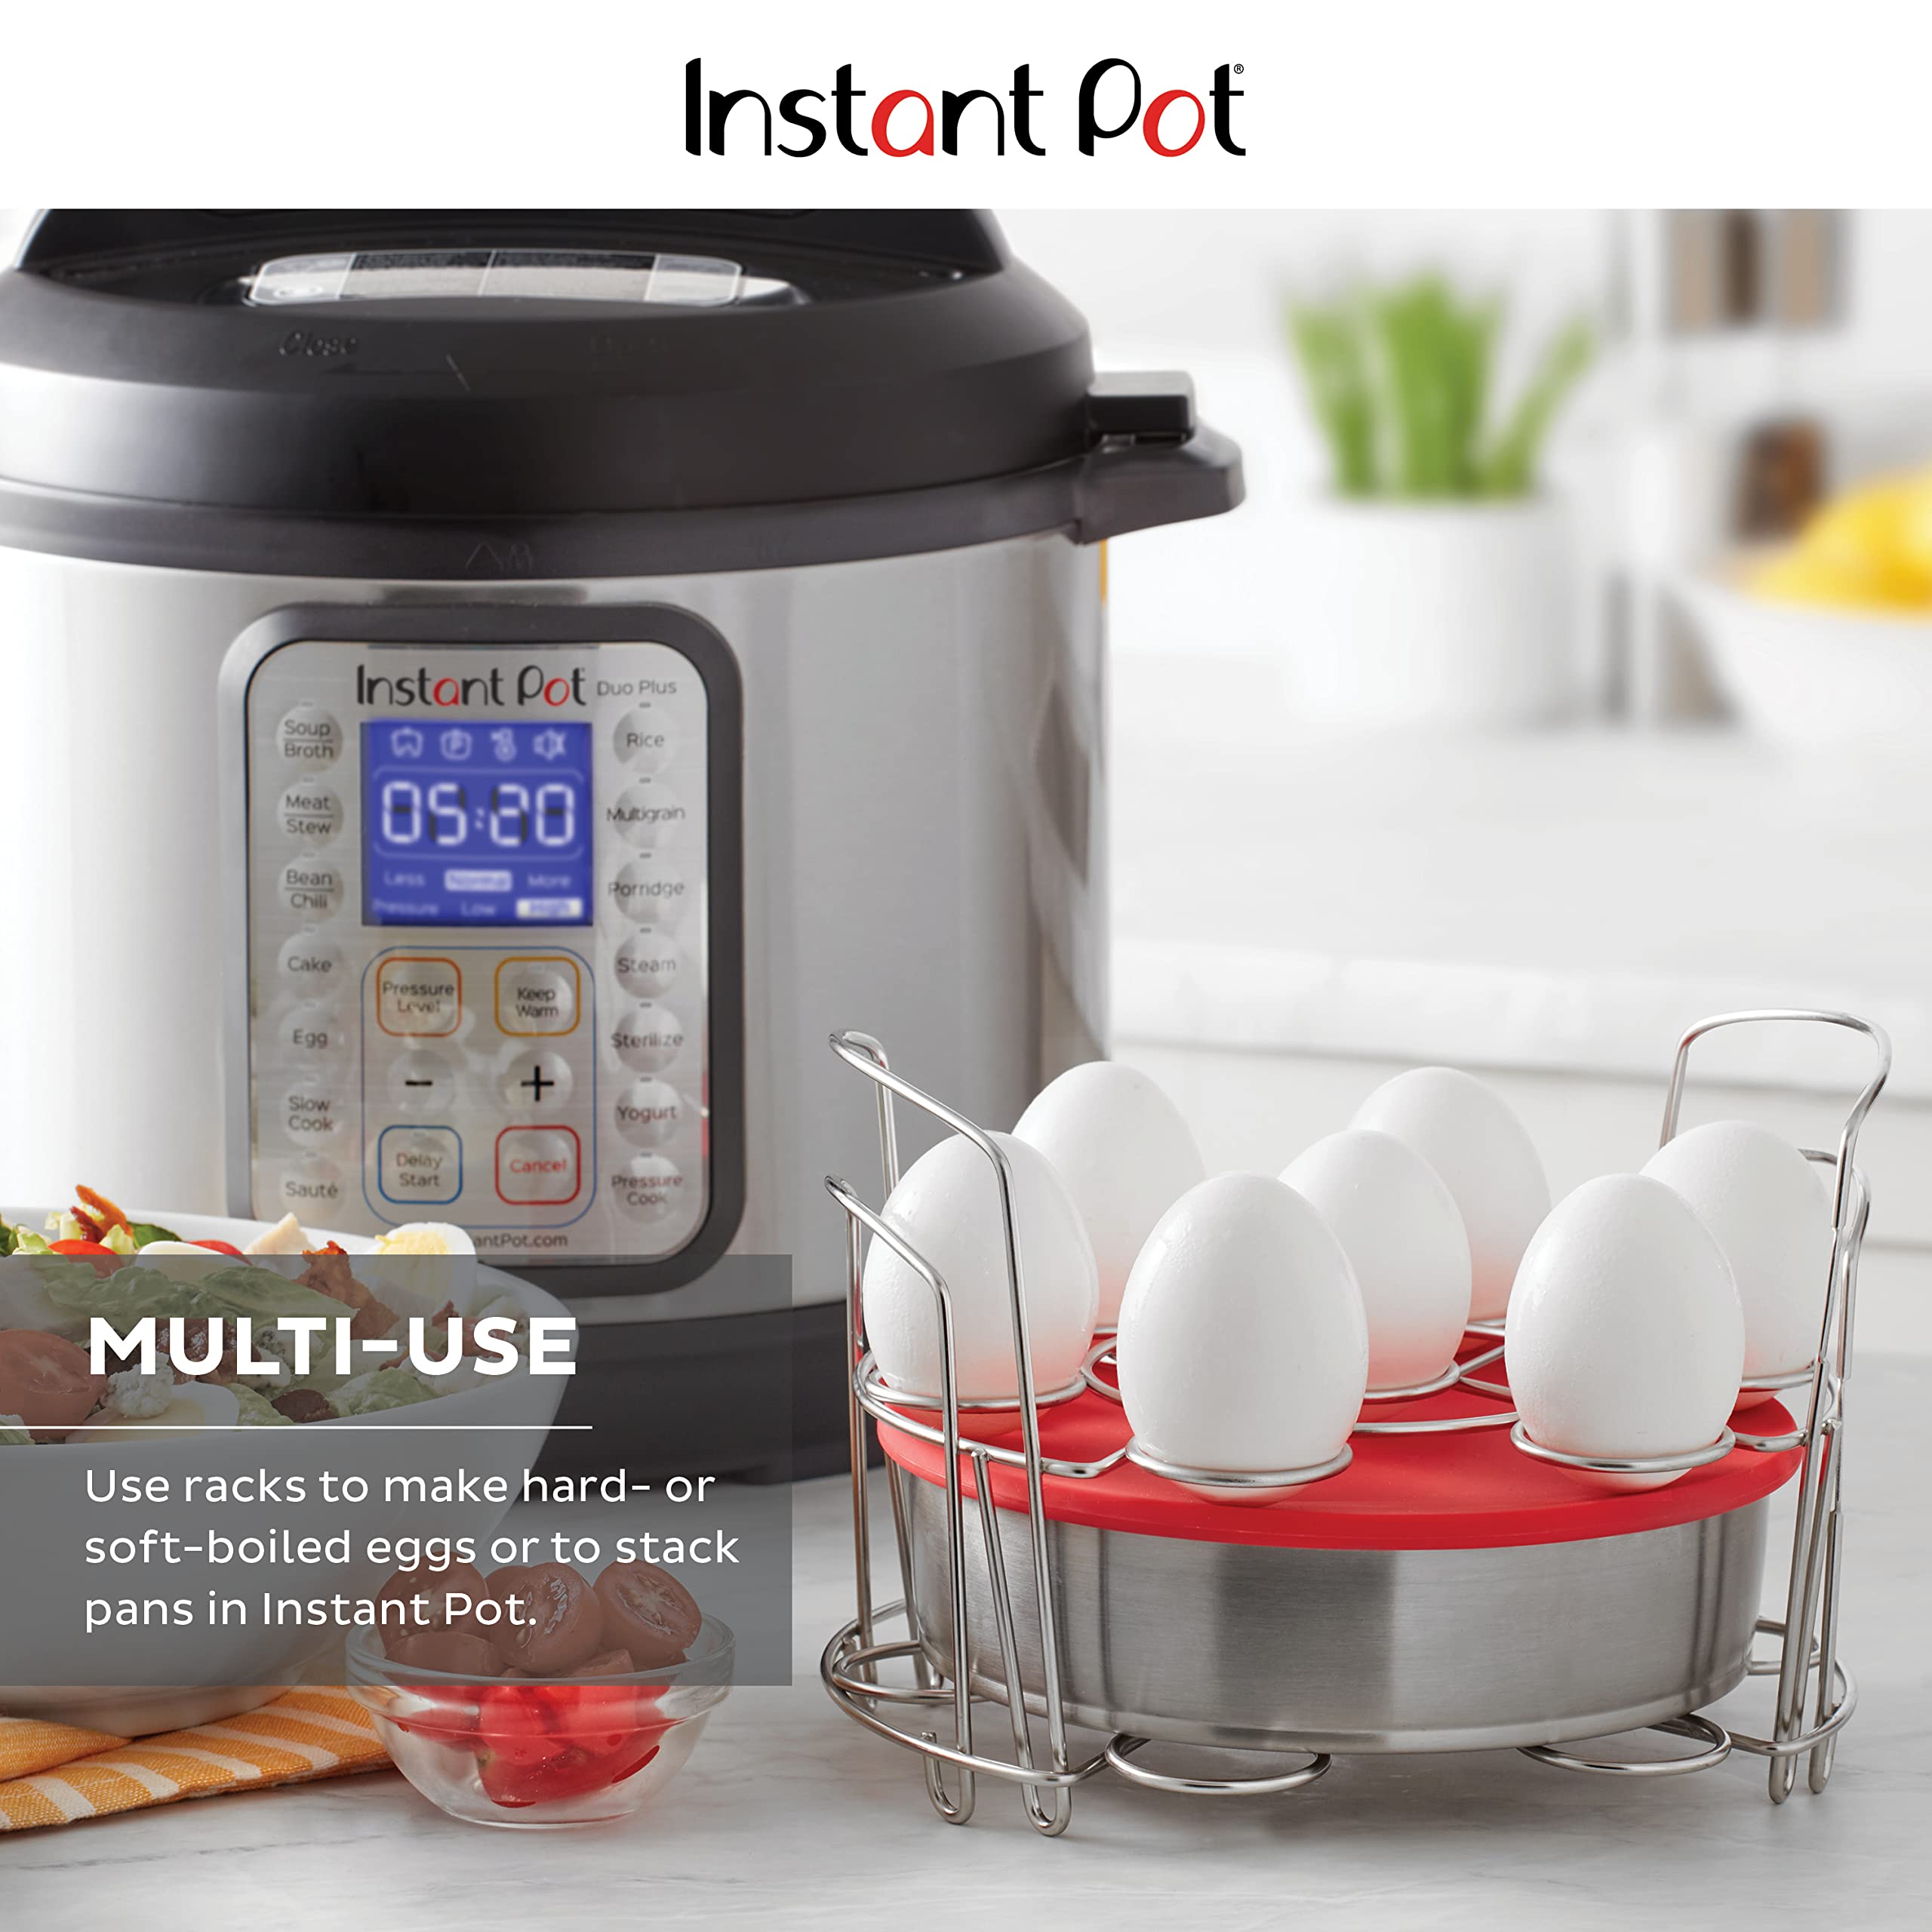 Instant Pot Official Cook/Bake Set, 8-Piece, Compatible with 6-quart and 8-quart cookers, Red